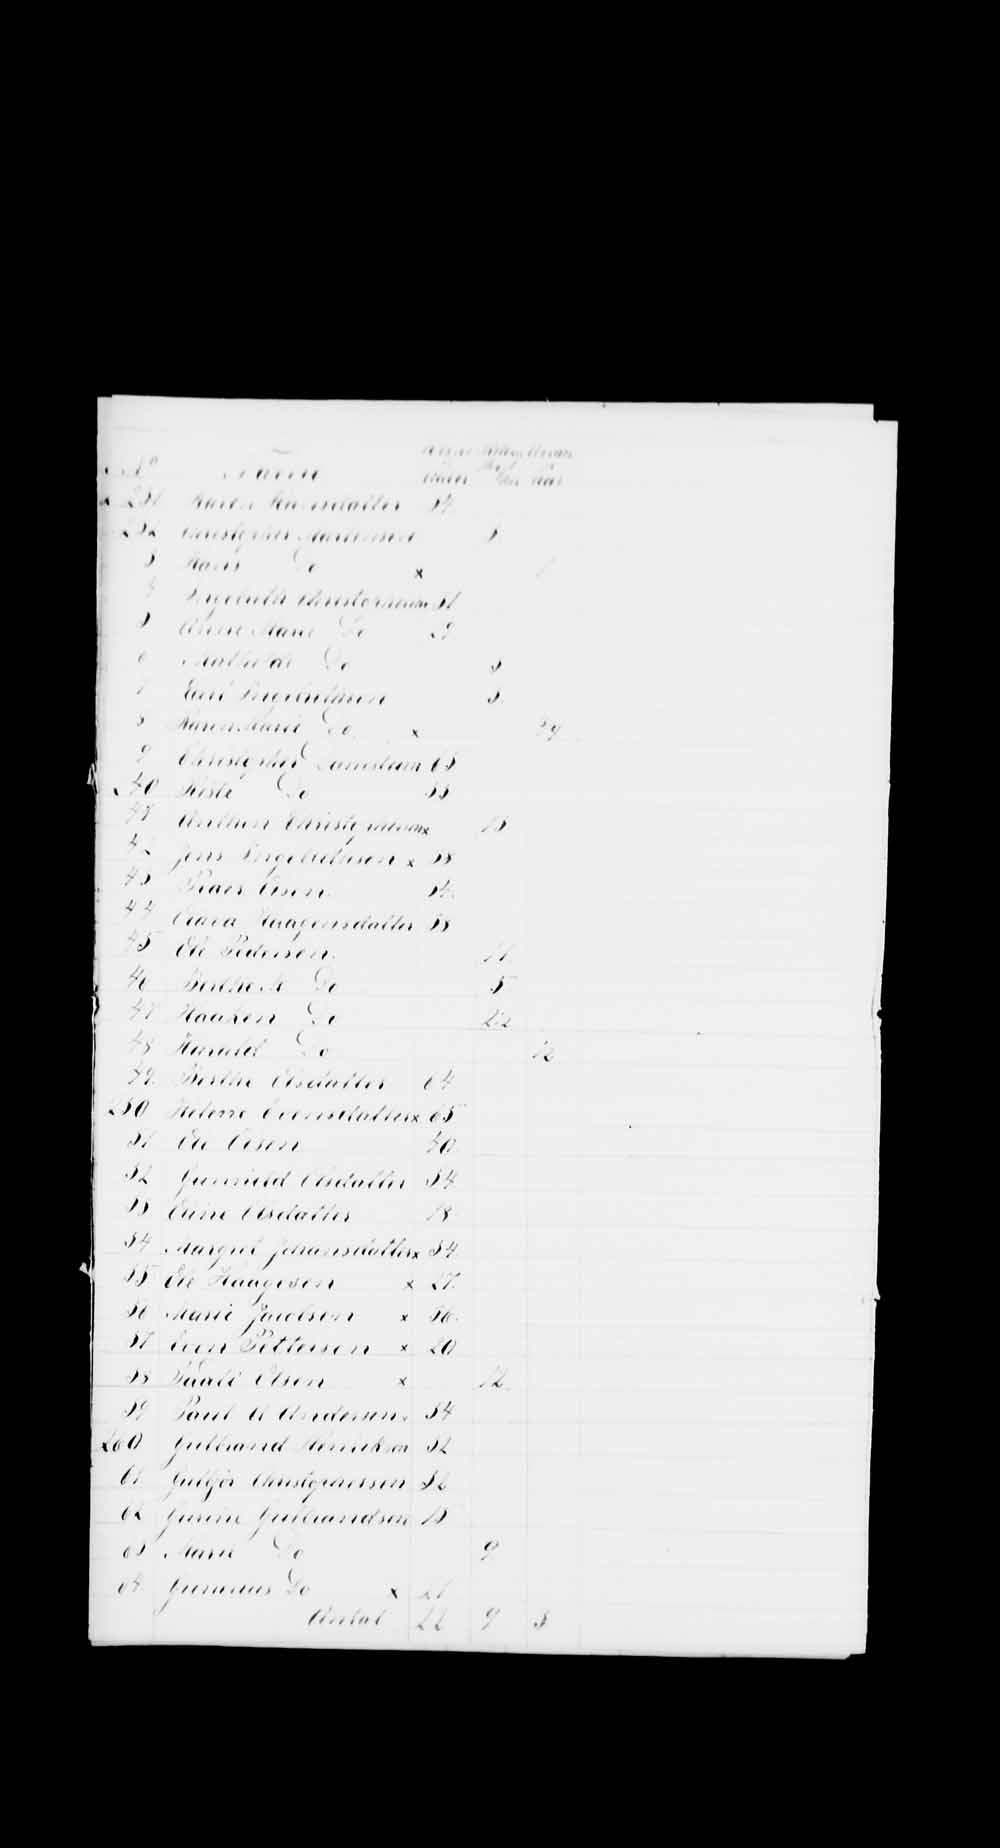 Digitized page of Passenger Lists for Image No.: e003530326